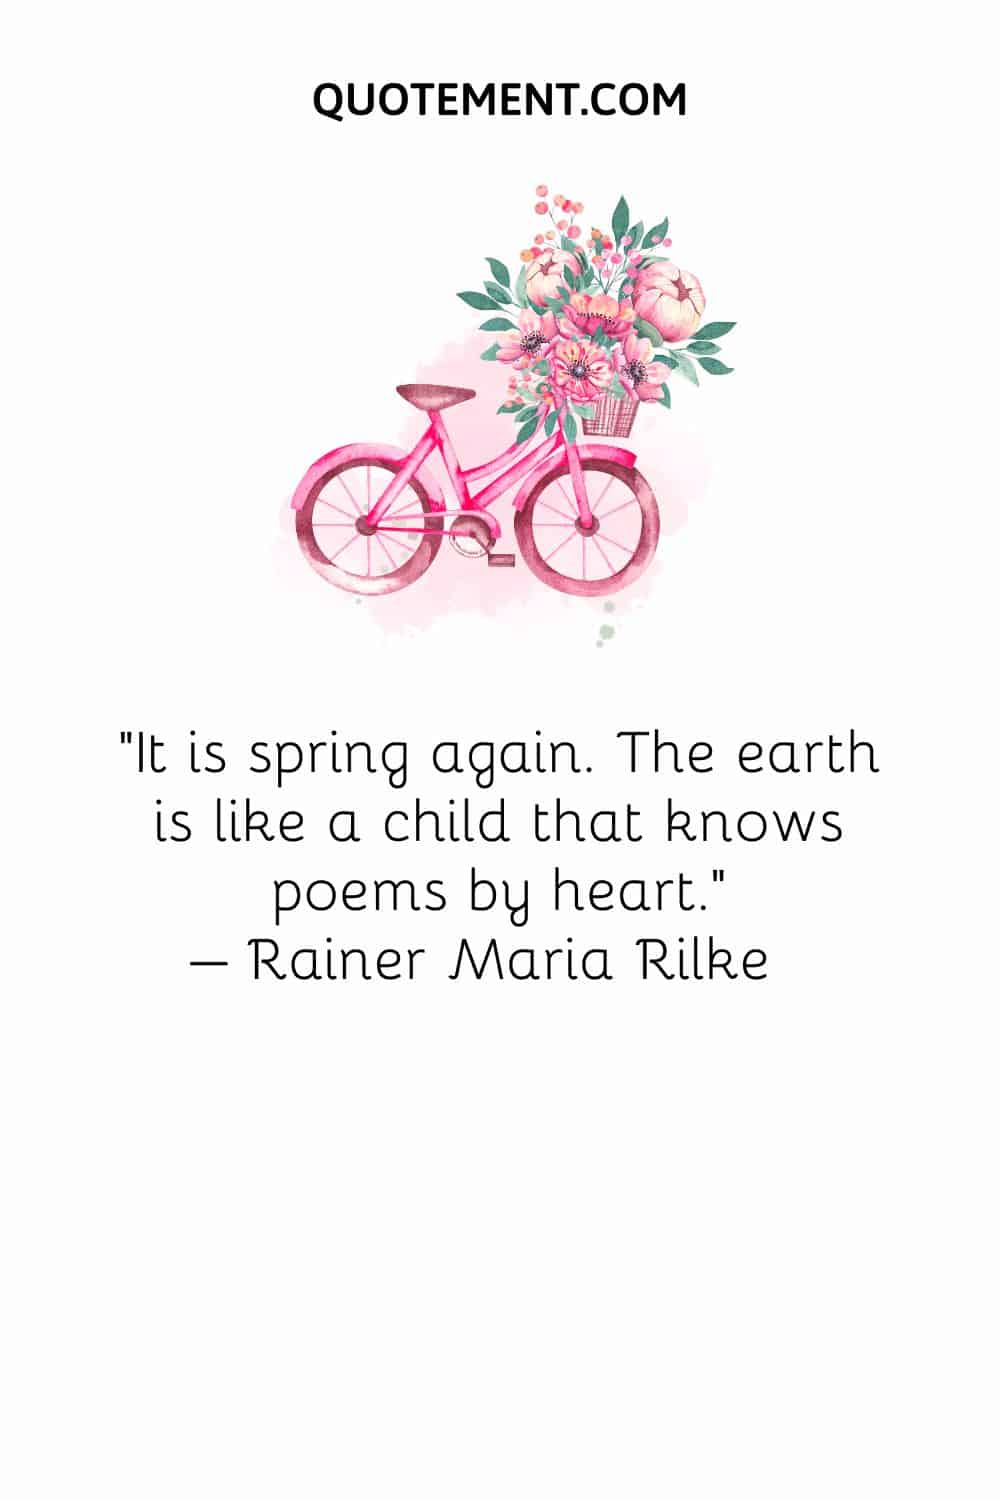 It is spring again. The earth is like a child that knows poems by heart. – Rainer Maria Rilke